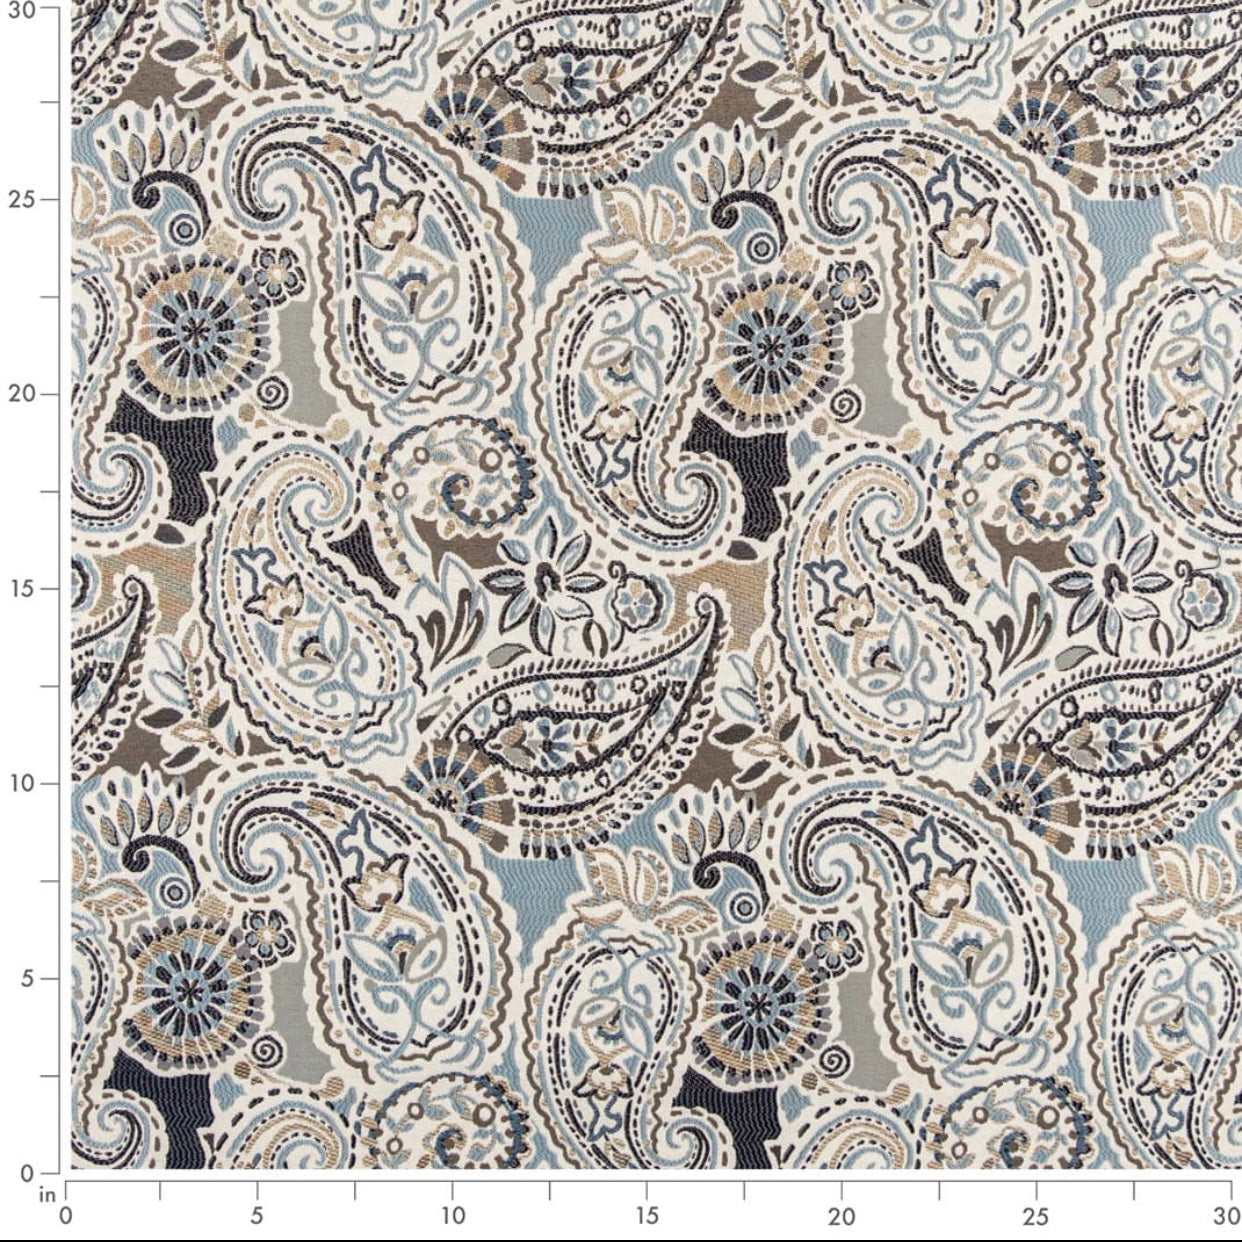 Taupe and Gray Contemporary Paisley Print Cotton Fabric by the Yard  Designer Drapery Curtain or Upholstery Fabric Tan and Gray Fabric M223